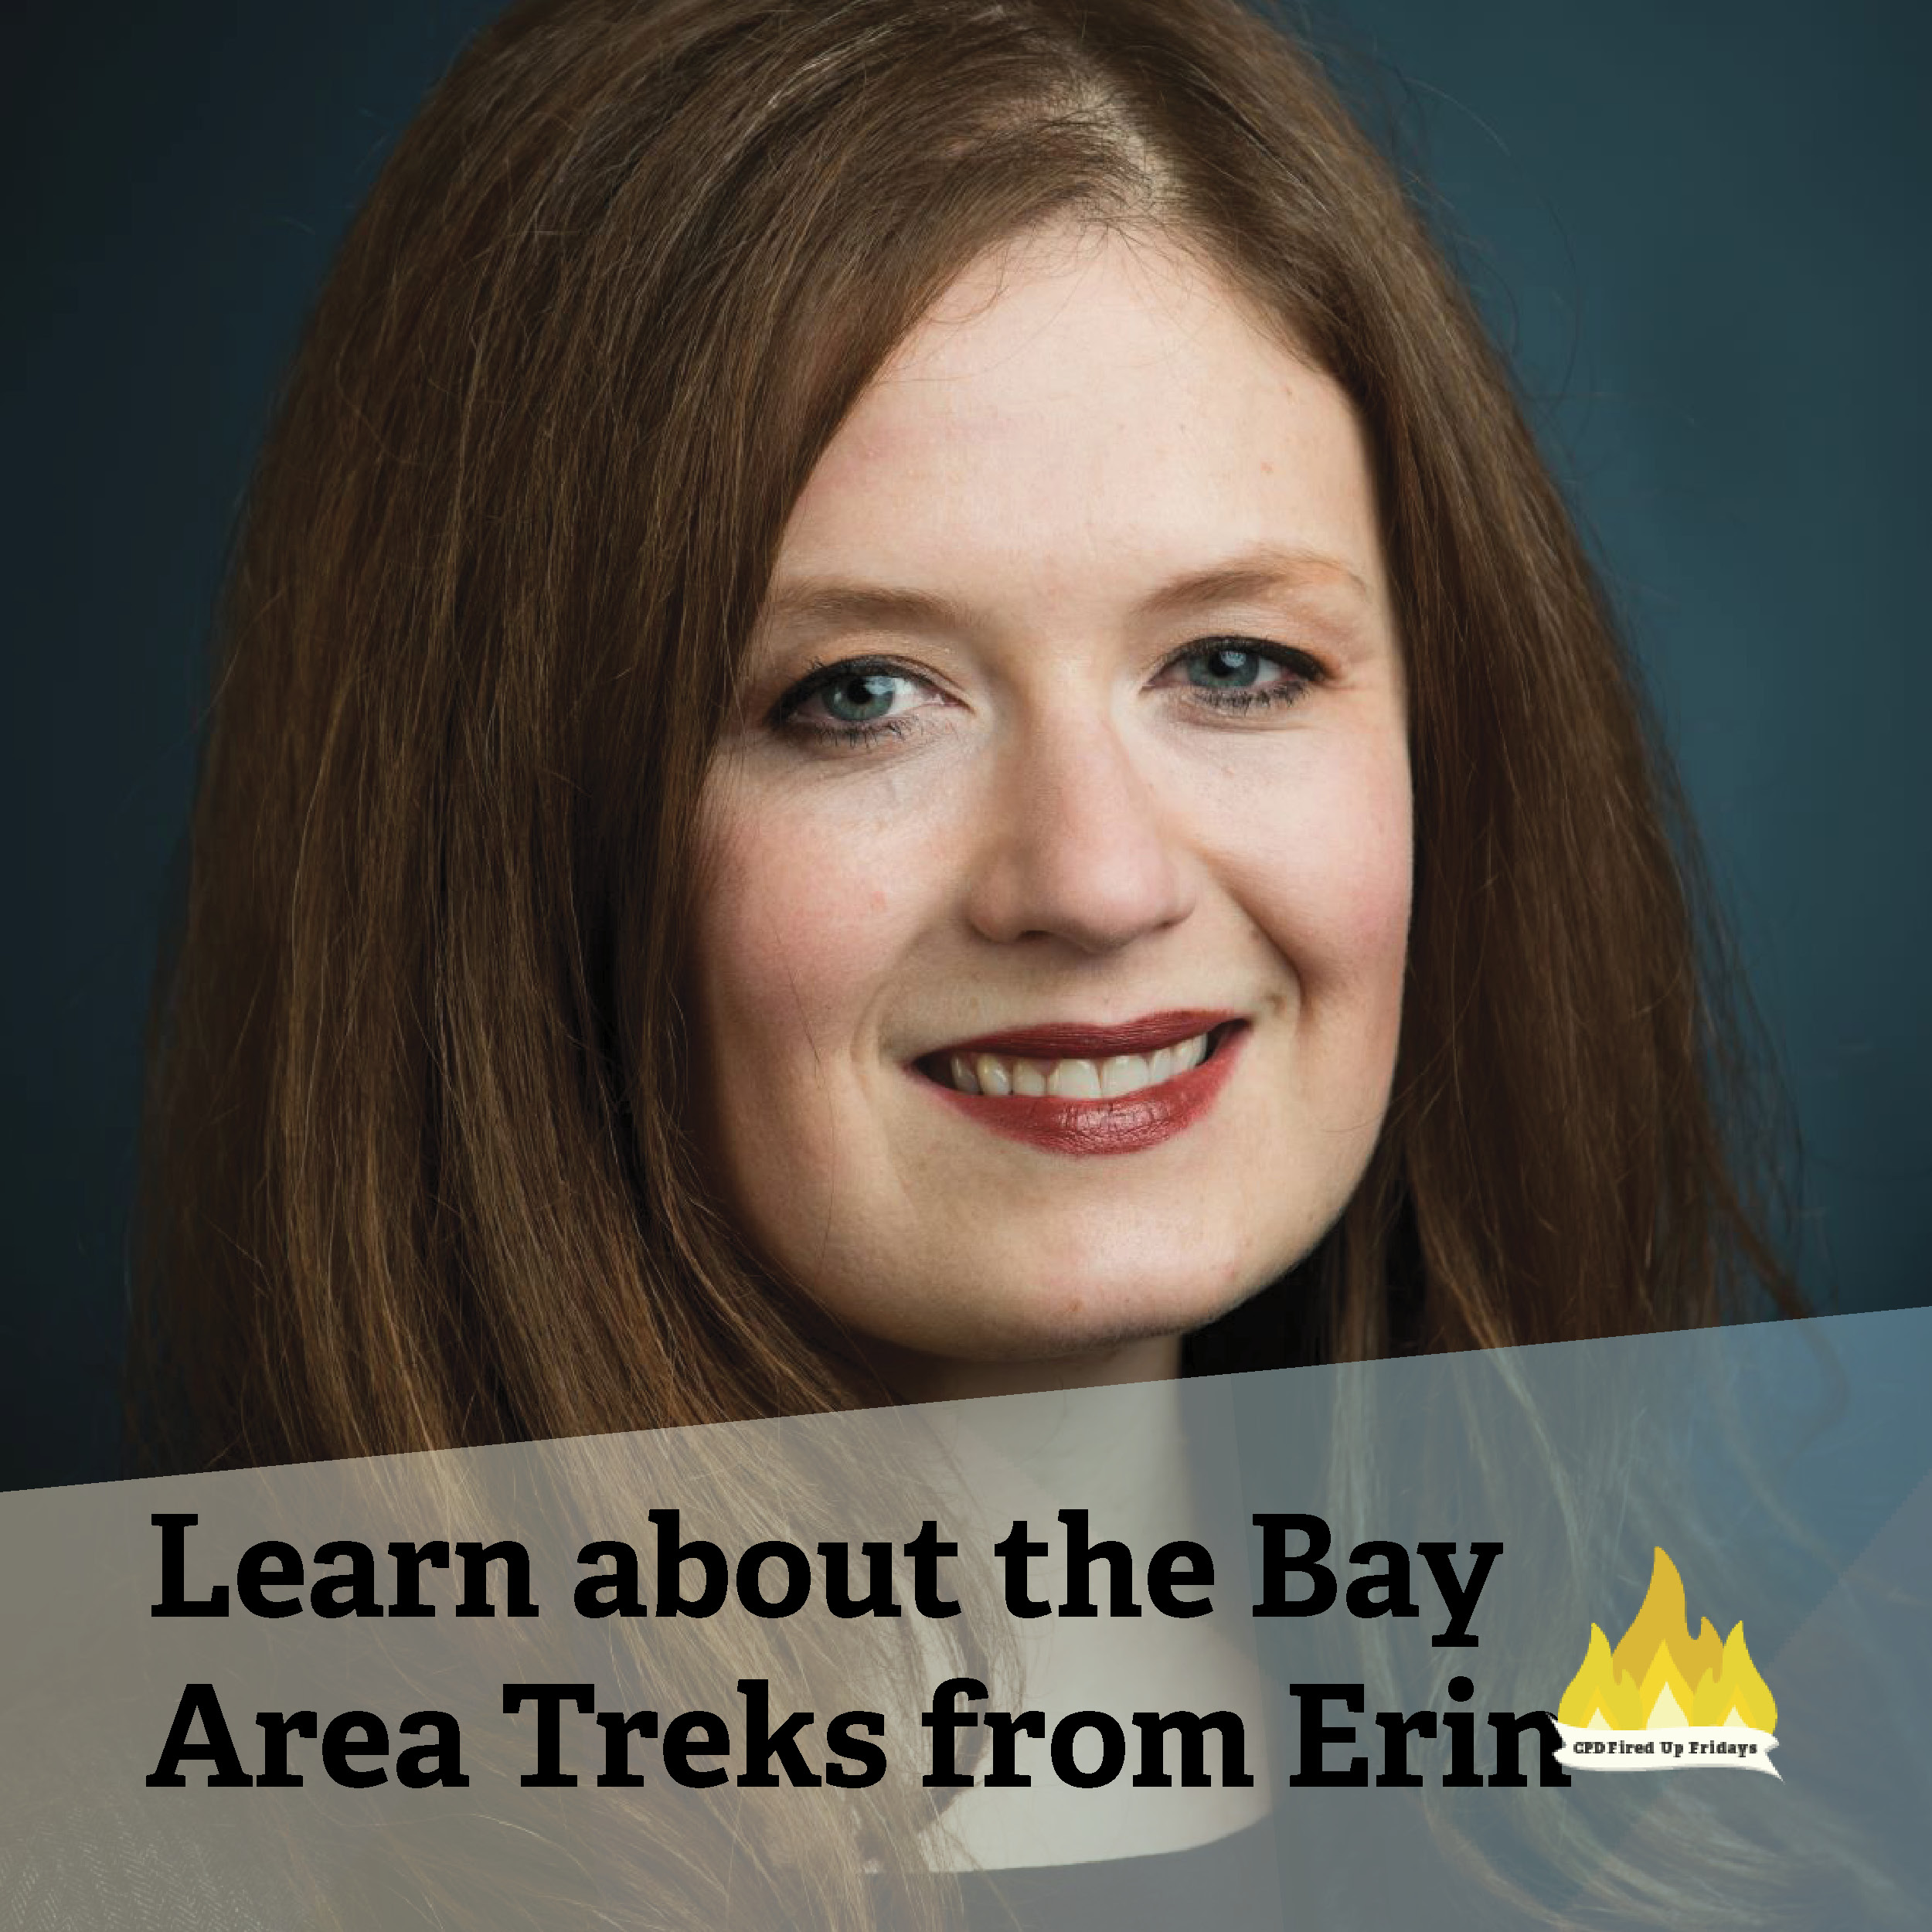 A portrait of Erin shields. Underneath, text reads: 'Learn about the Bay Area Treks from Erin.'